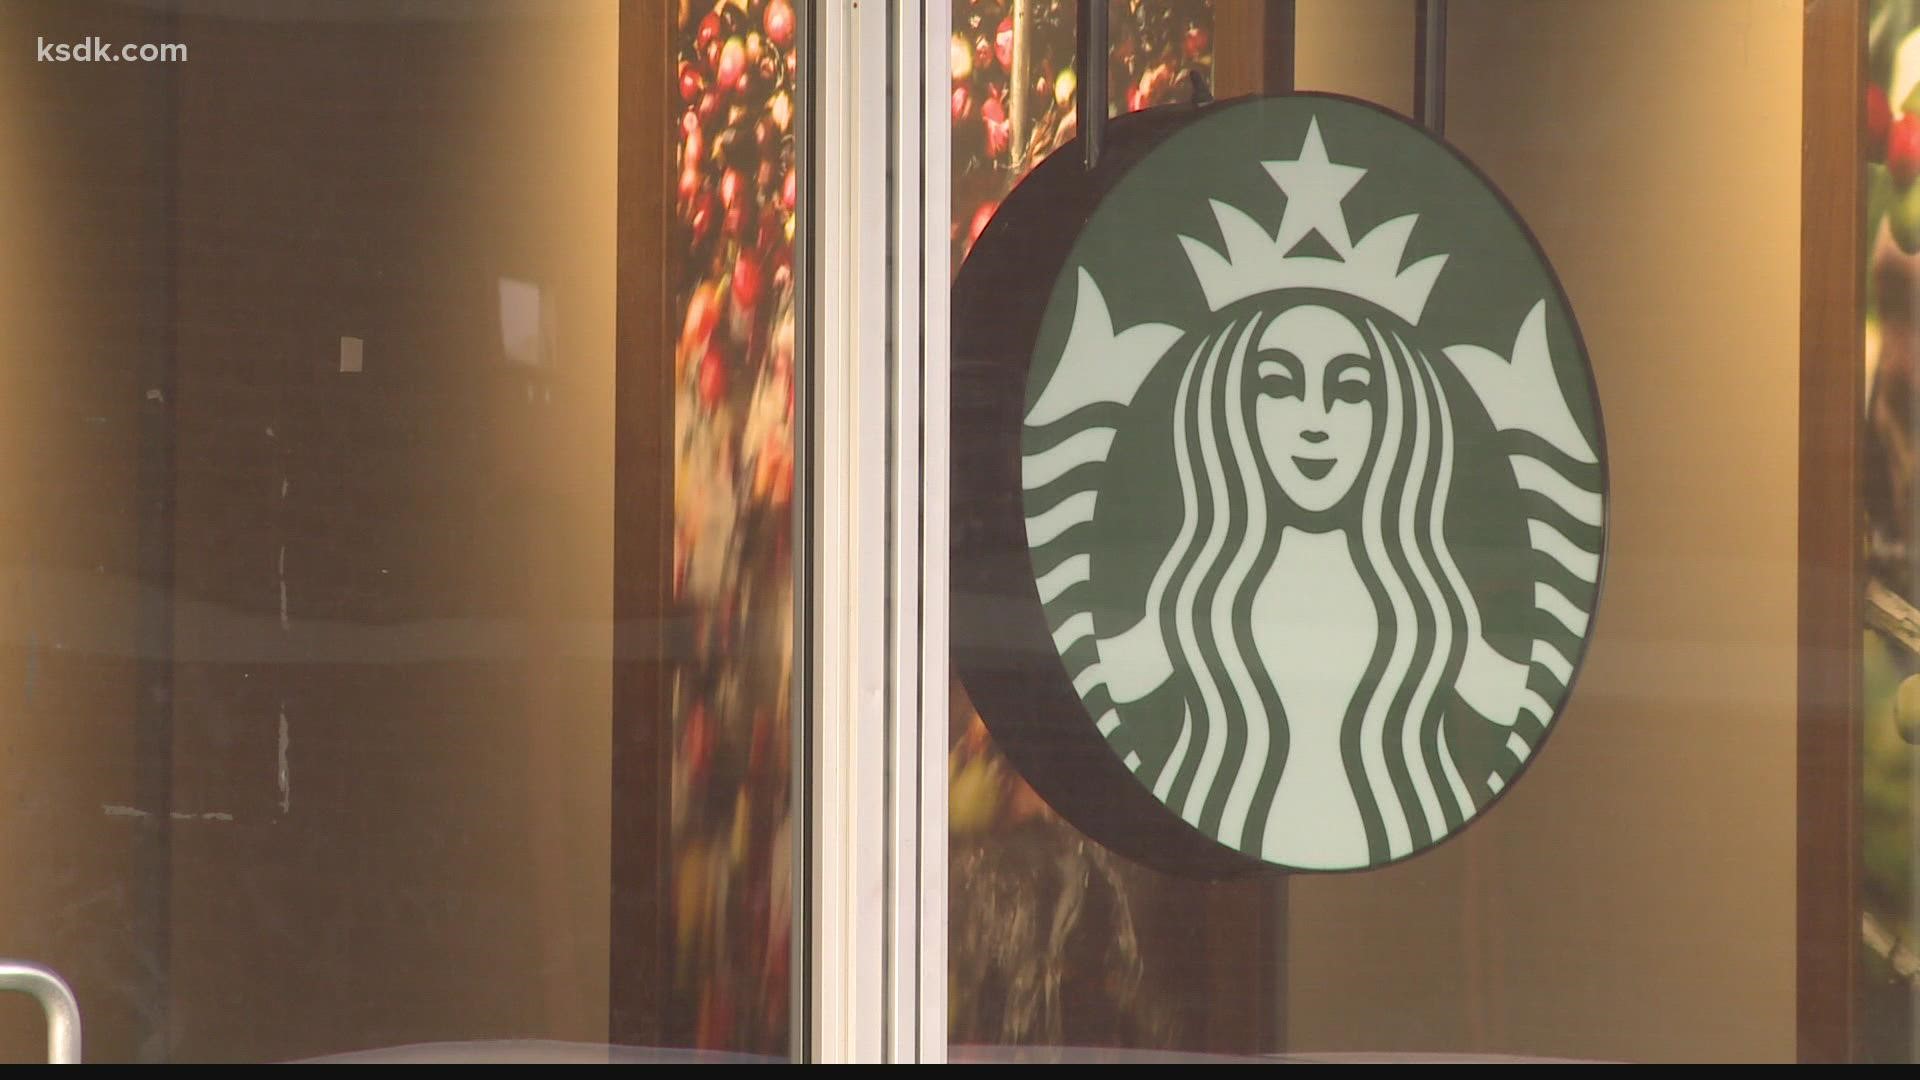 Employees at four St. Louis area Starbucks locations have now declared their intentions to unionize.